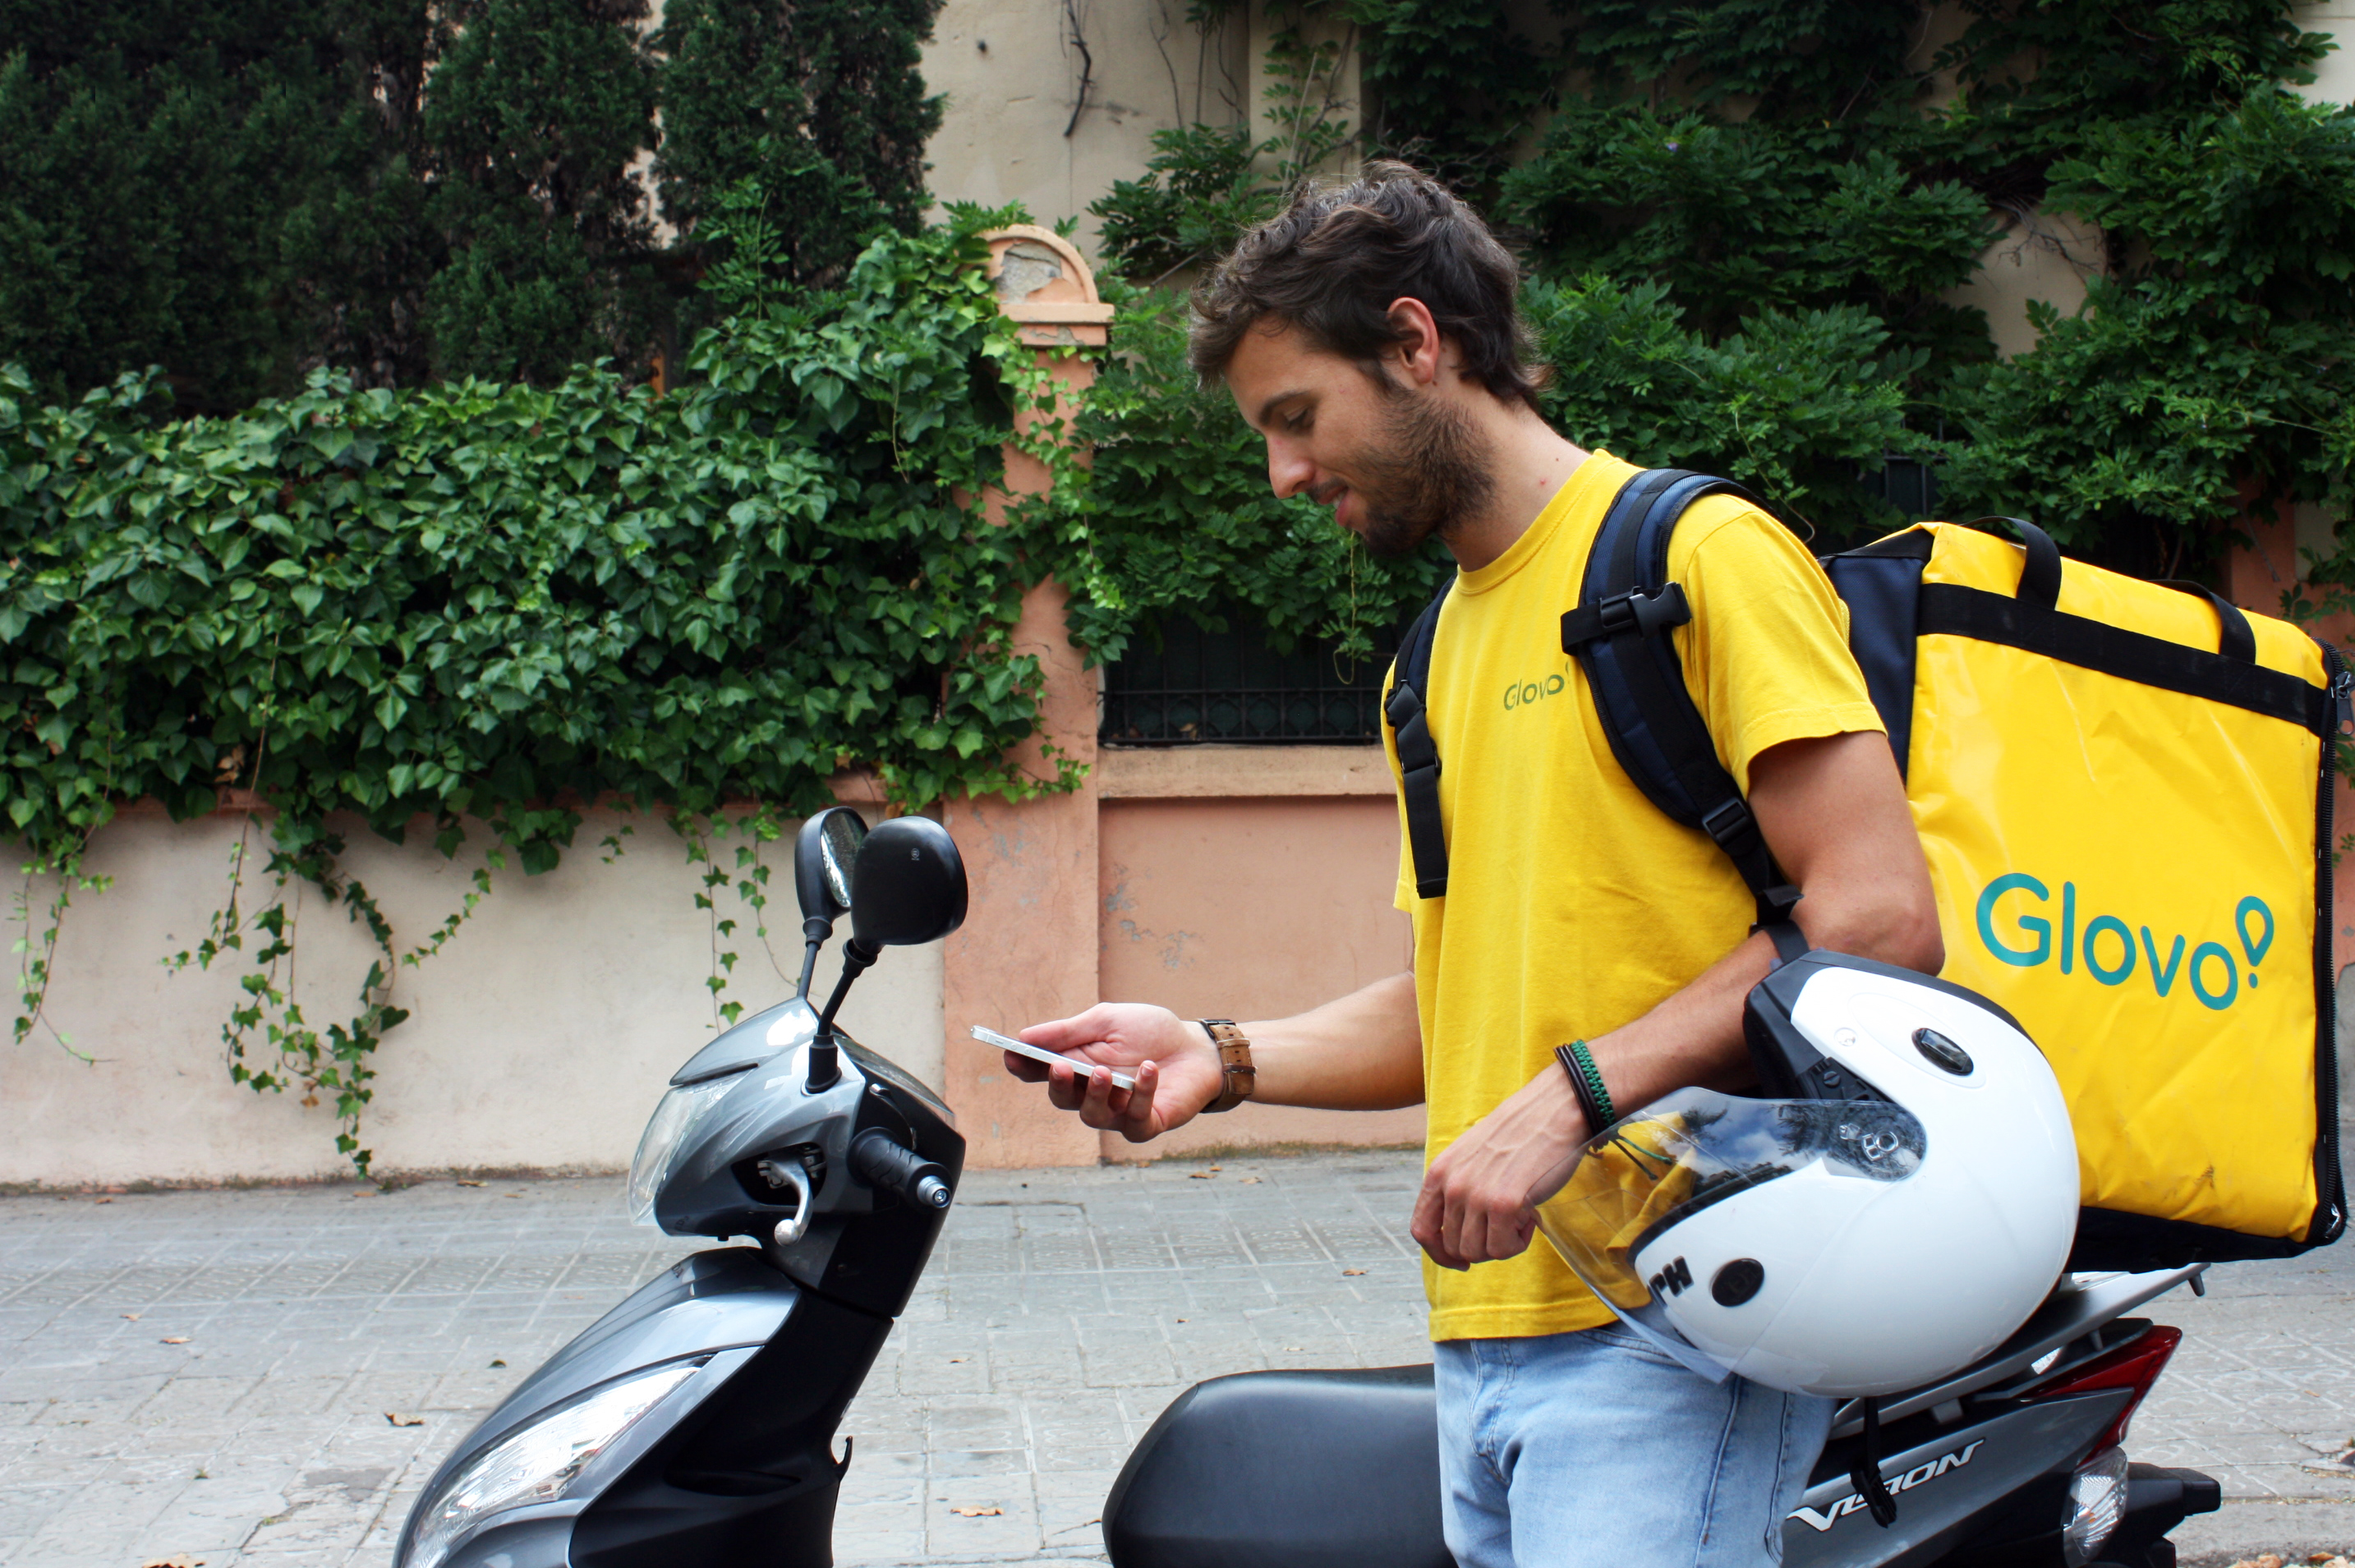 Now You Can Order Anything in the Most Convenient Way Possible With Glovo